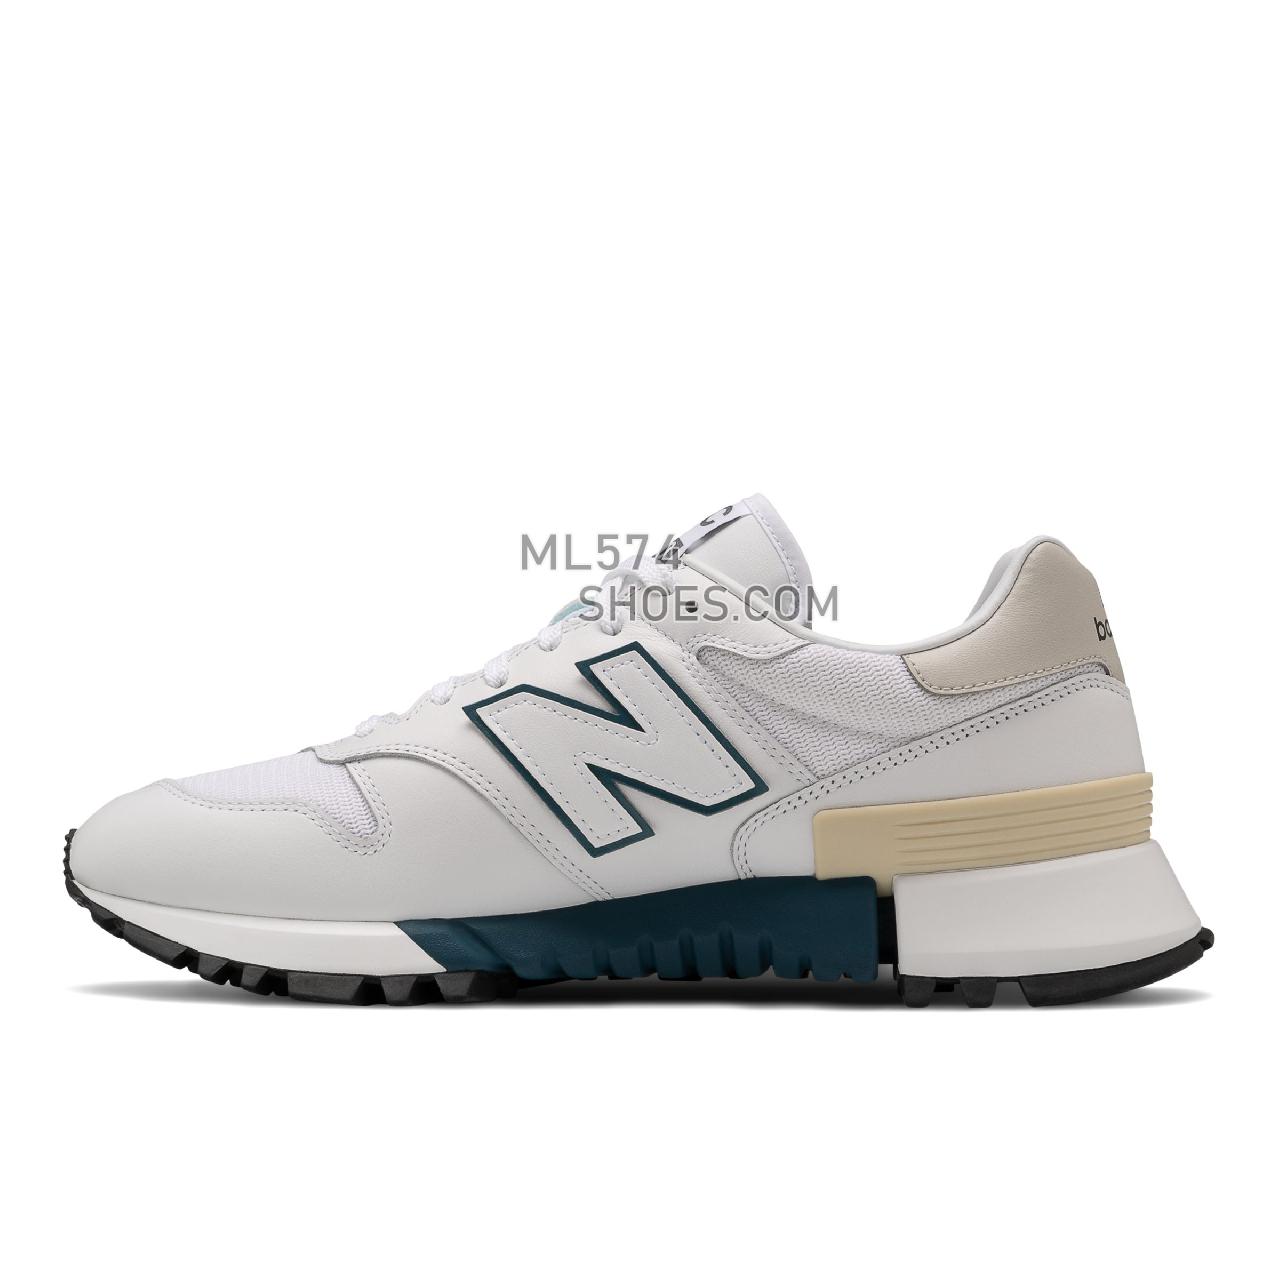 New Balance MS1300V1 - Men's Sport Style Sneakers - White with Mallard Blue - MS1300WG